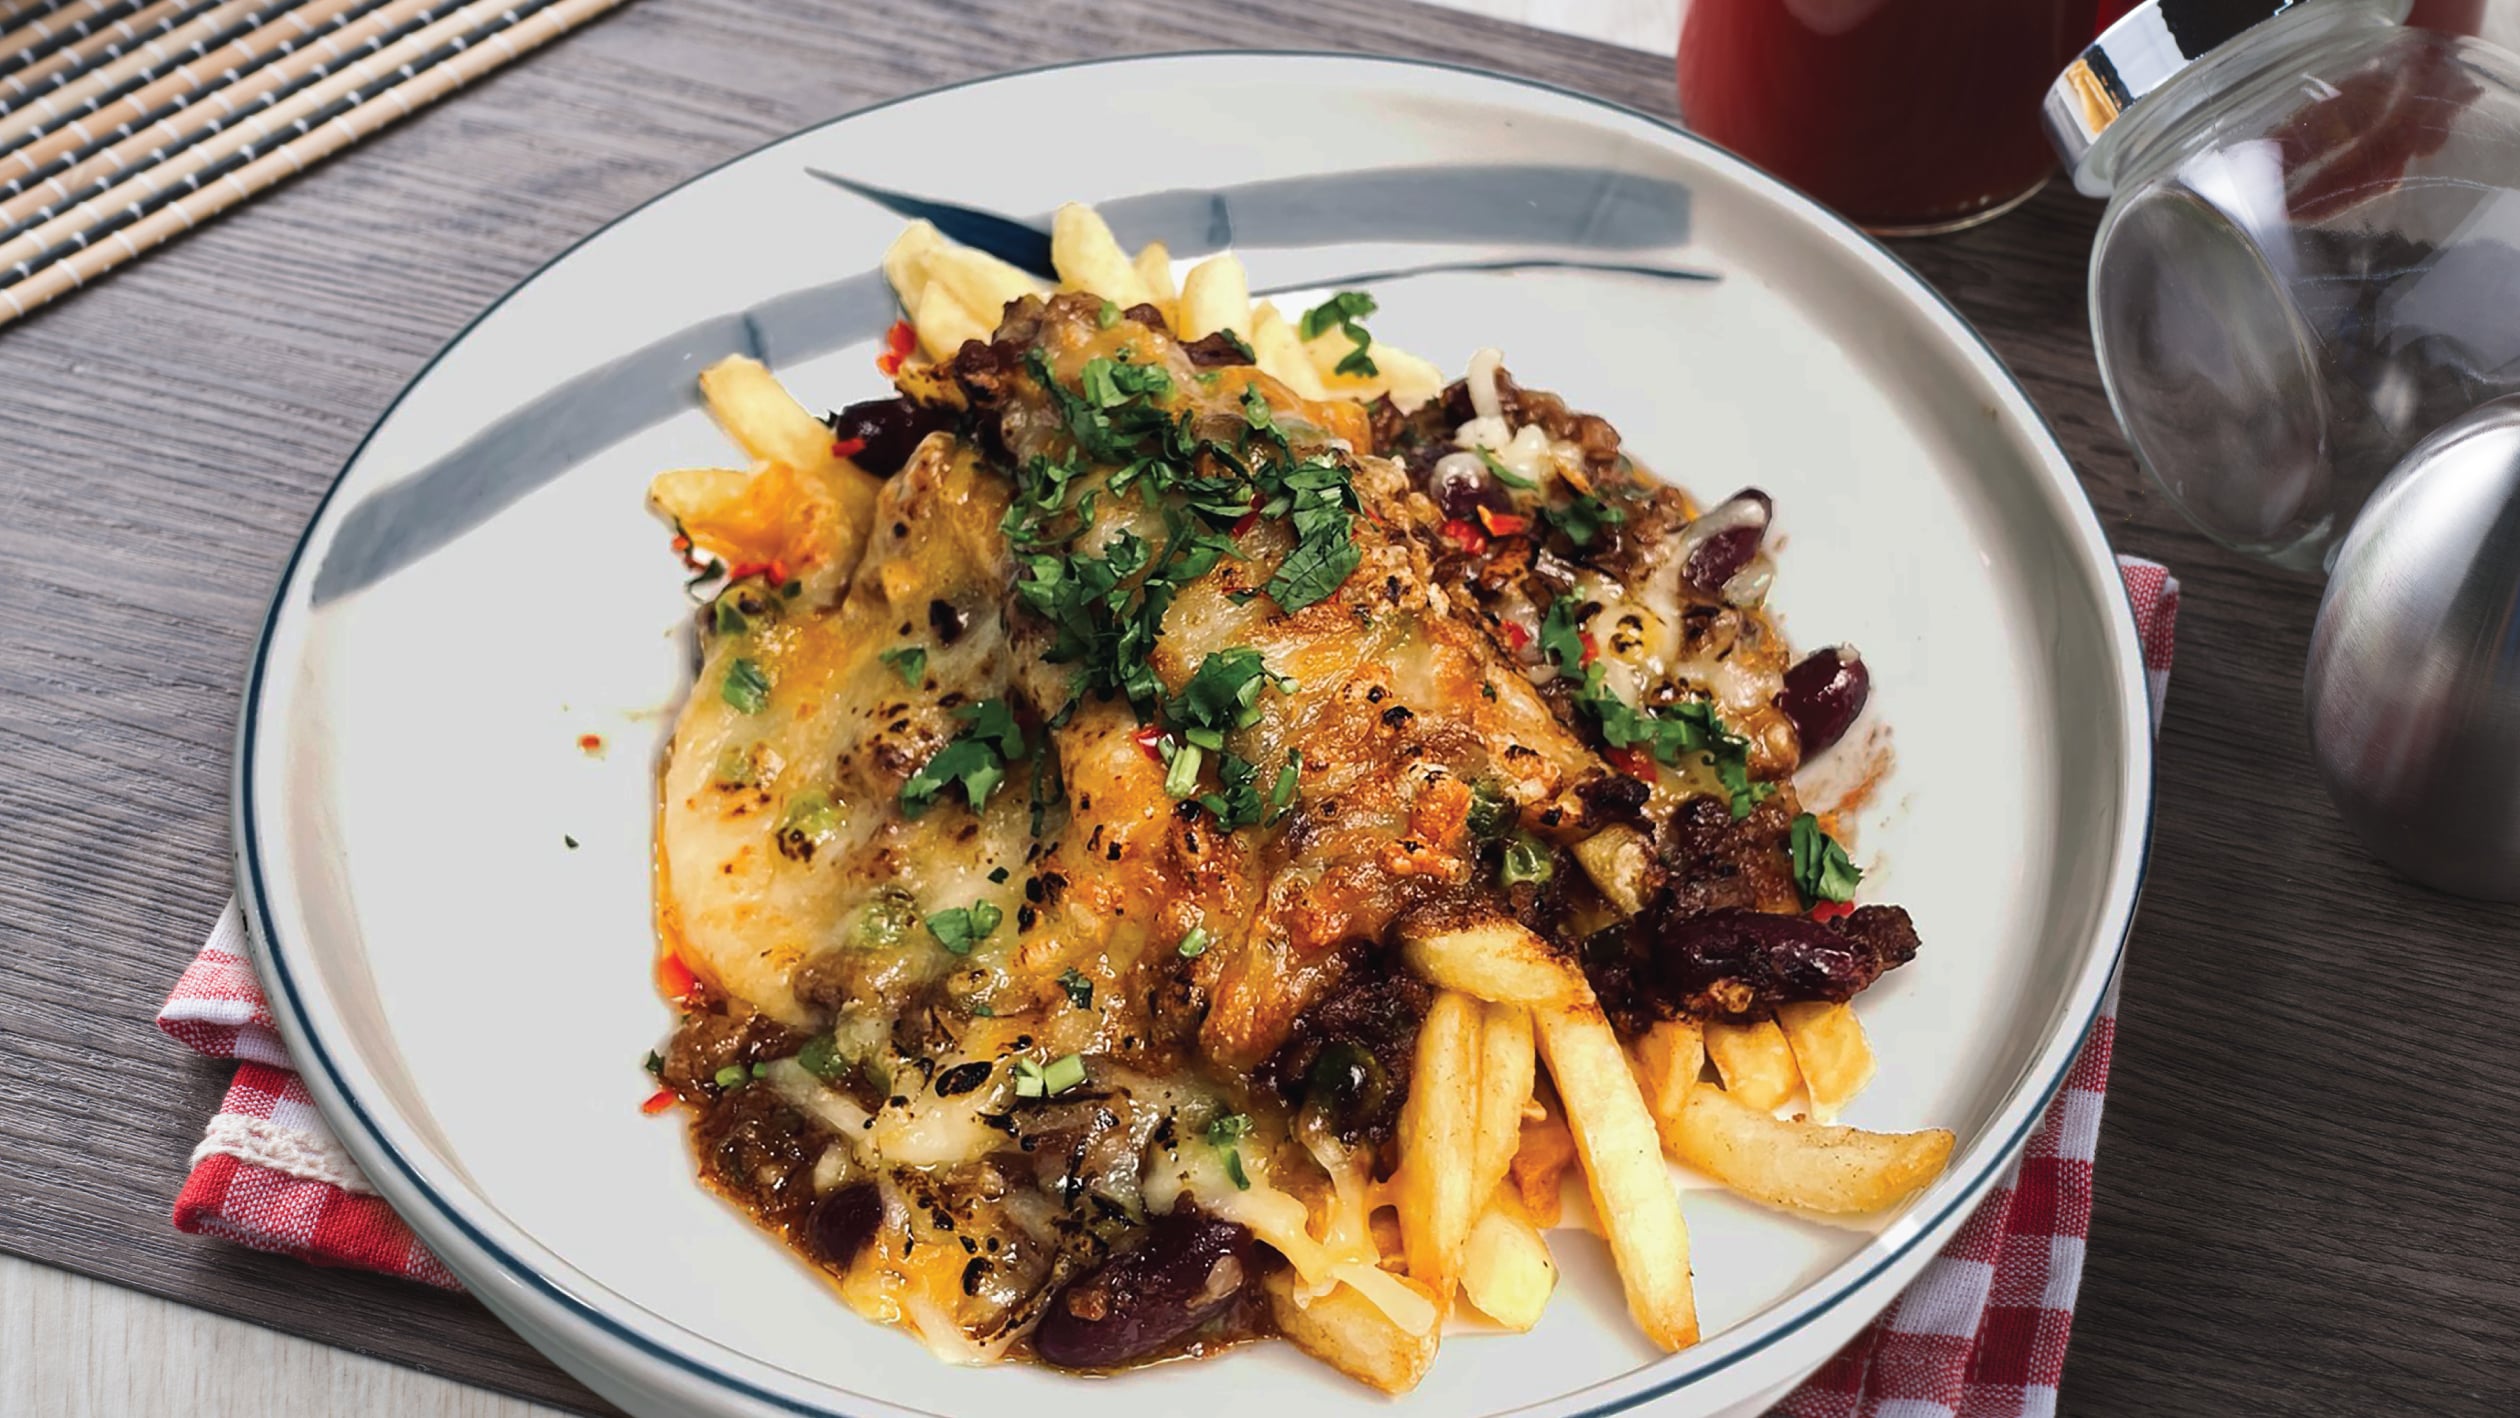 Loaded Fries with Chili Con Carne